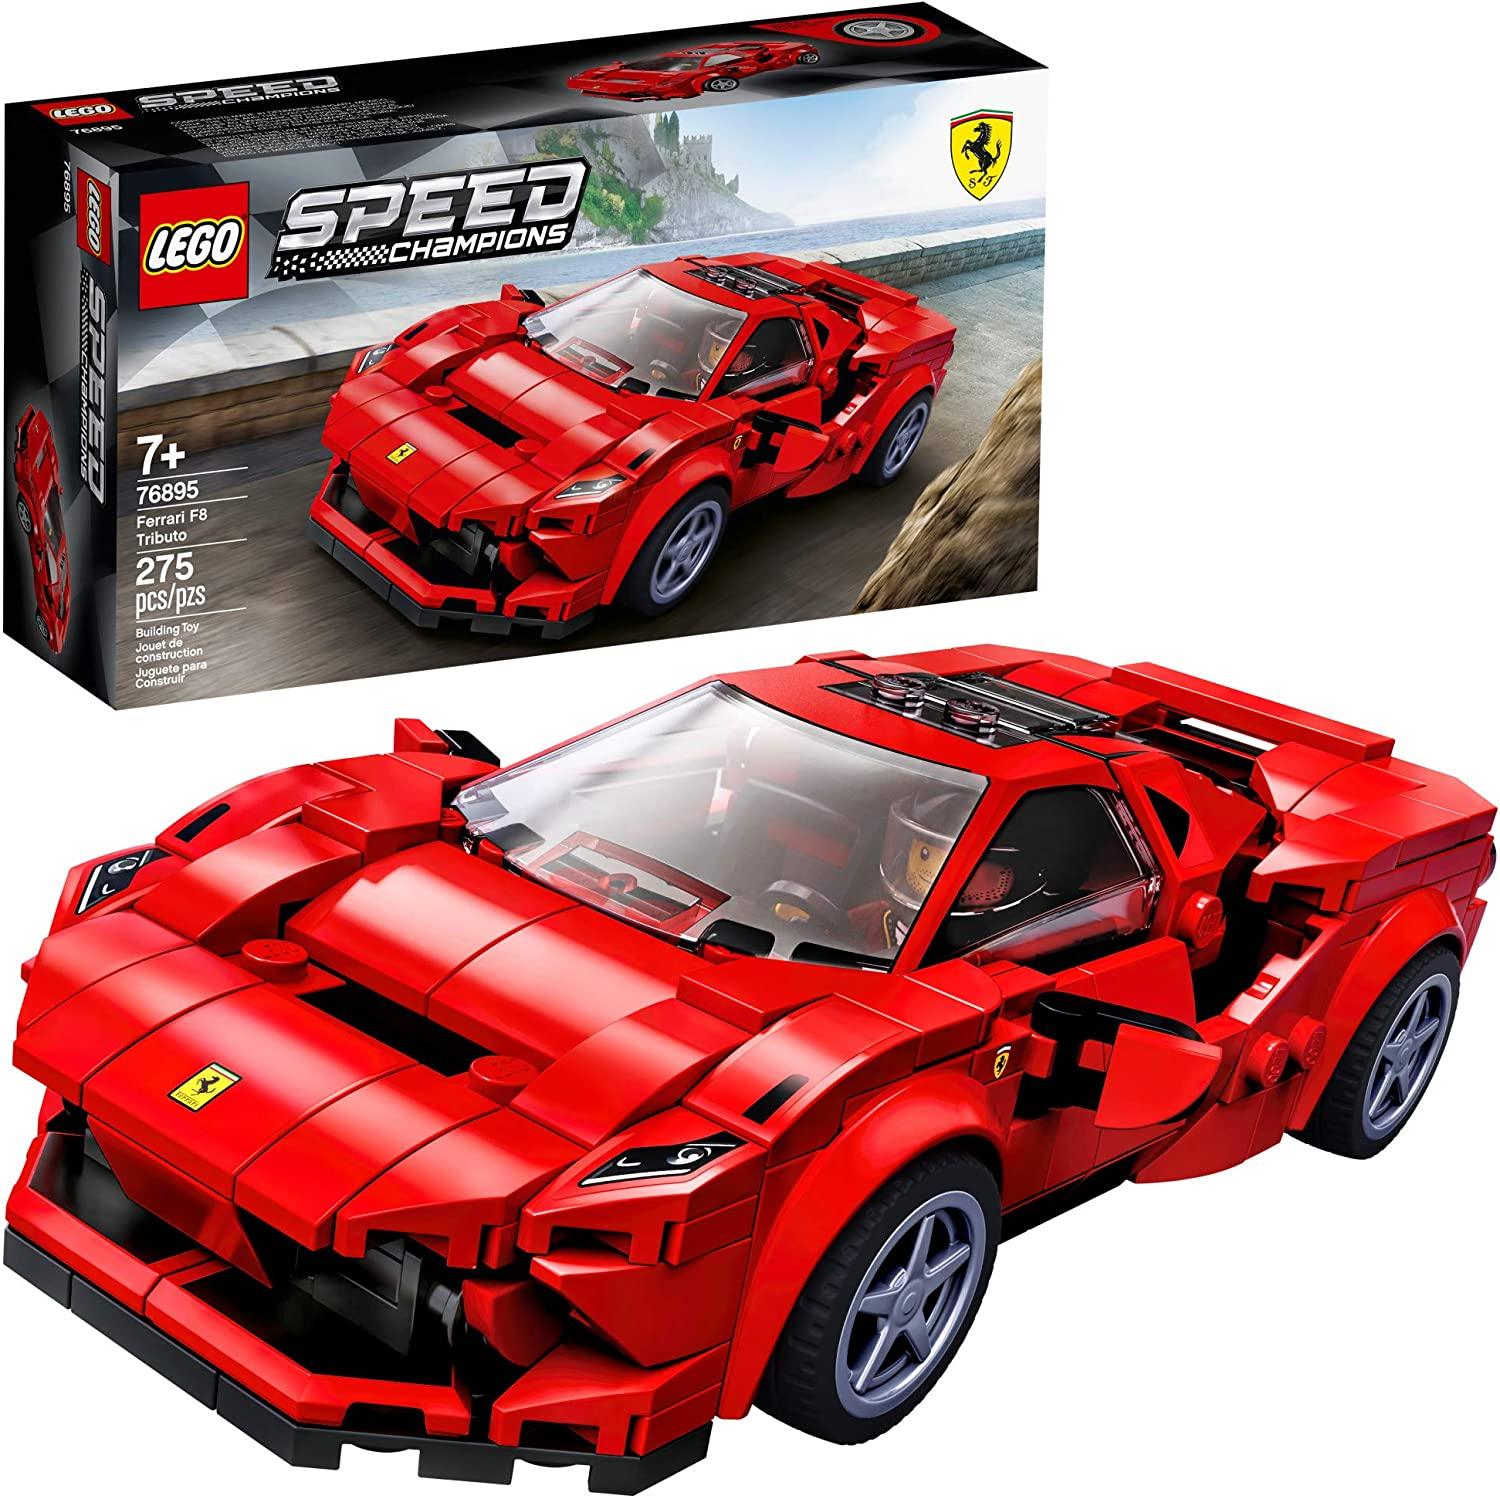 LEGO Speed Champions 76895 Ferrari F8 Tributo Toy Cars for $15.99